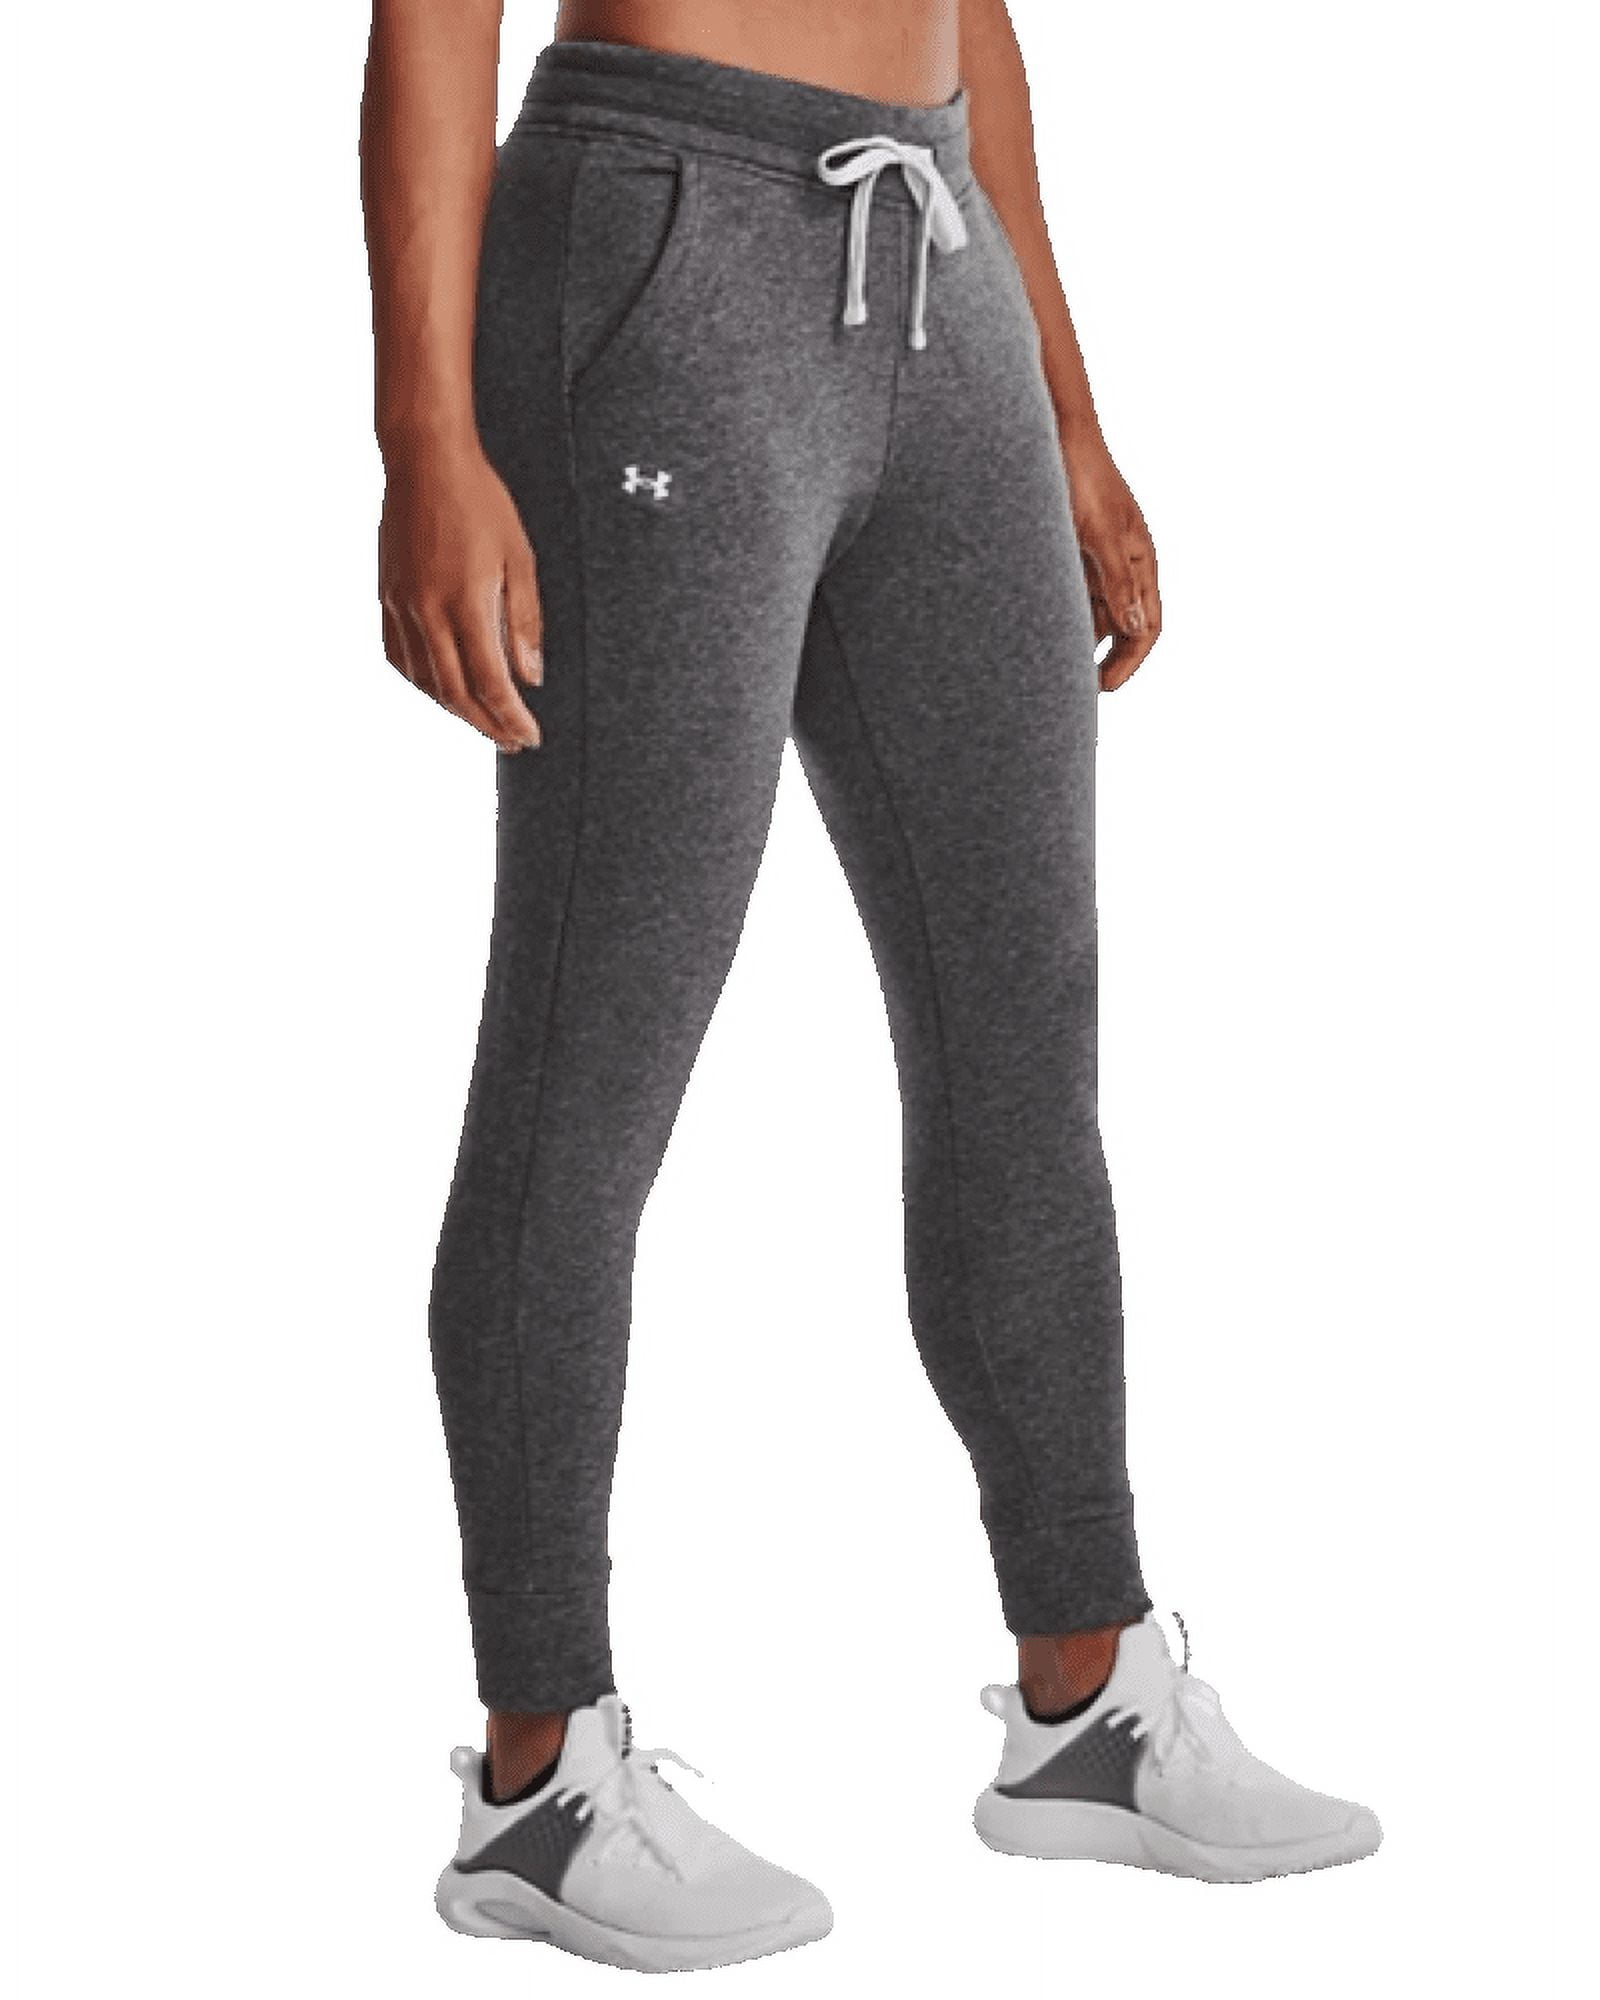 Under Armour Women's Rival Fleece Tapered Joggers Sweatpants S